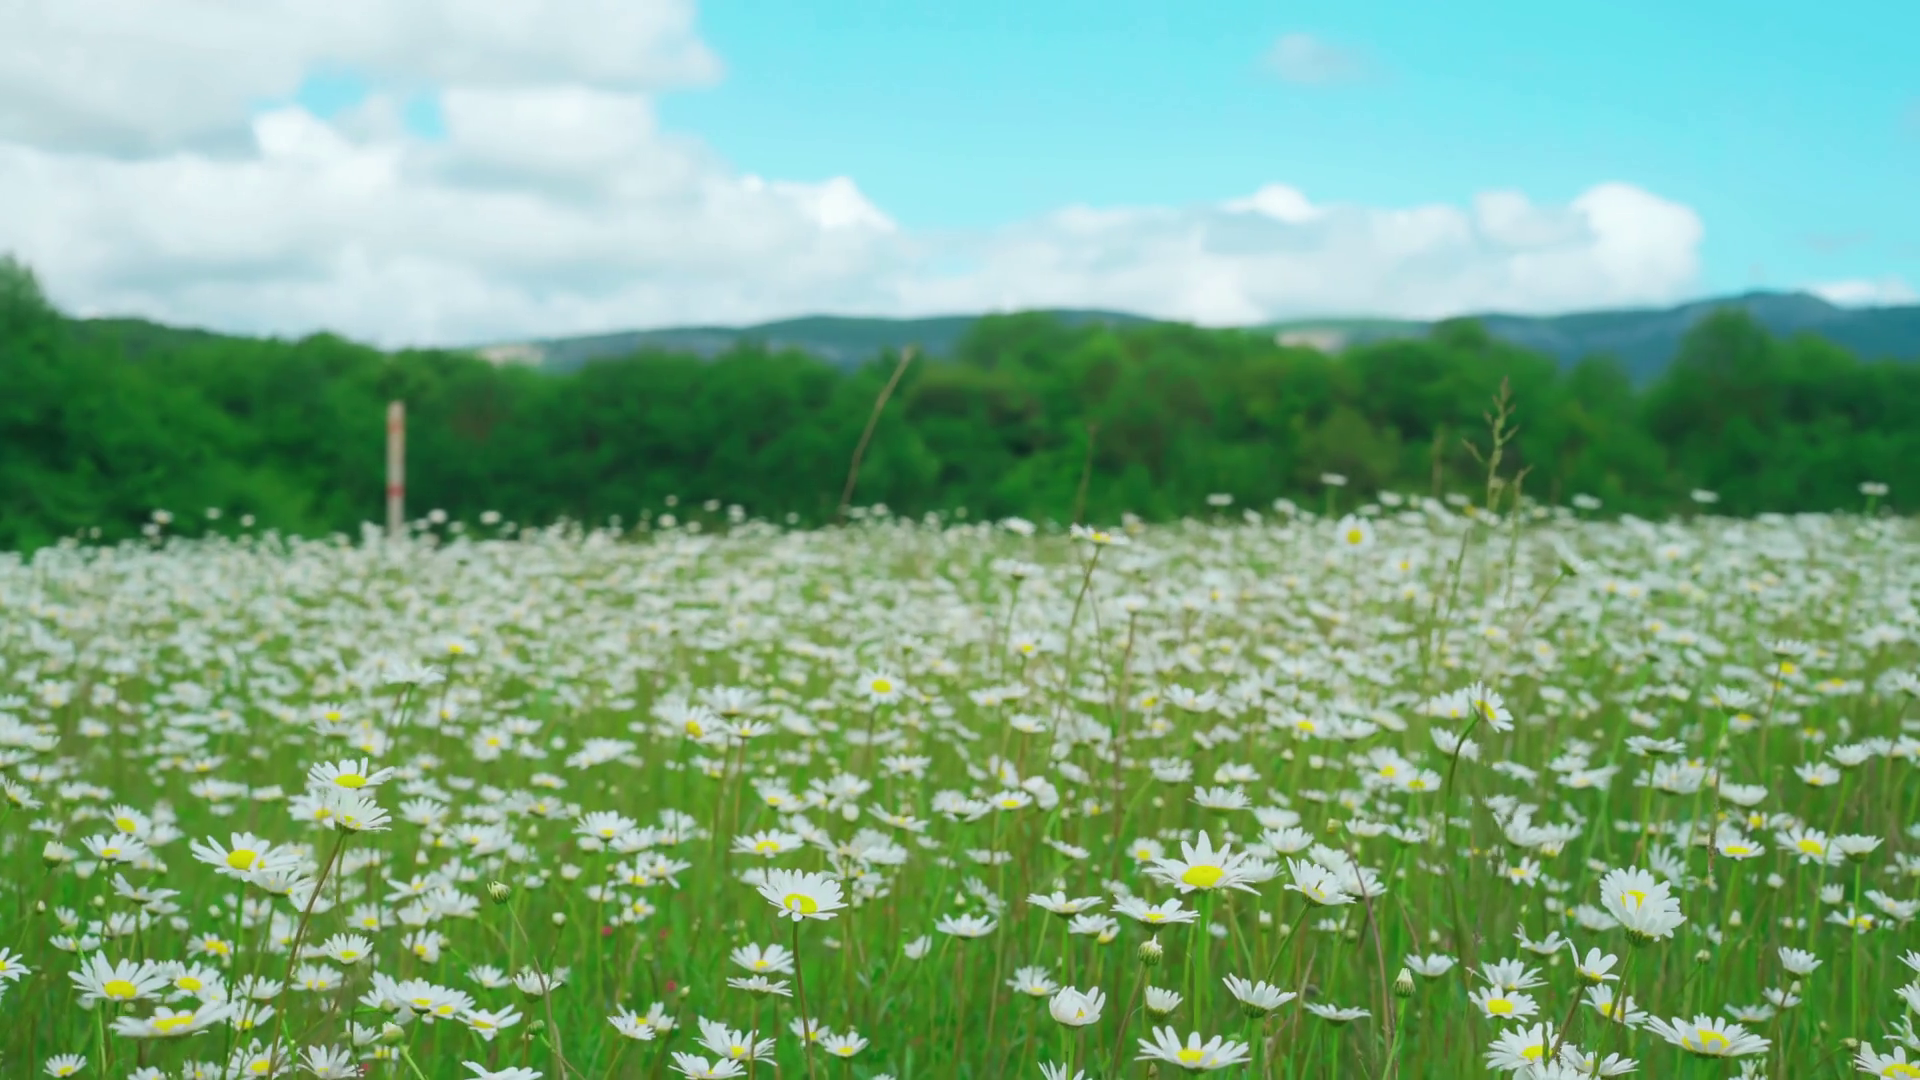 Walking through the field of Chamomile flowers swaying in the wind ...